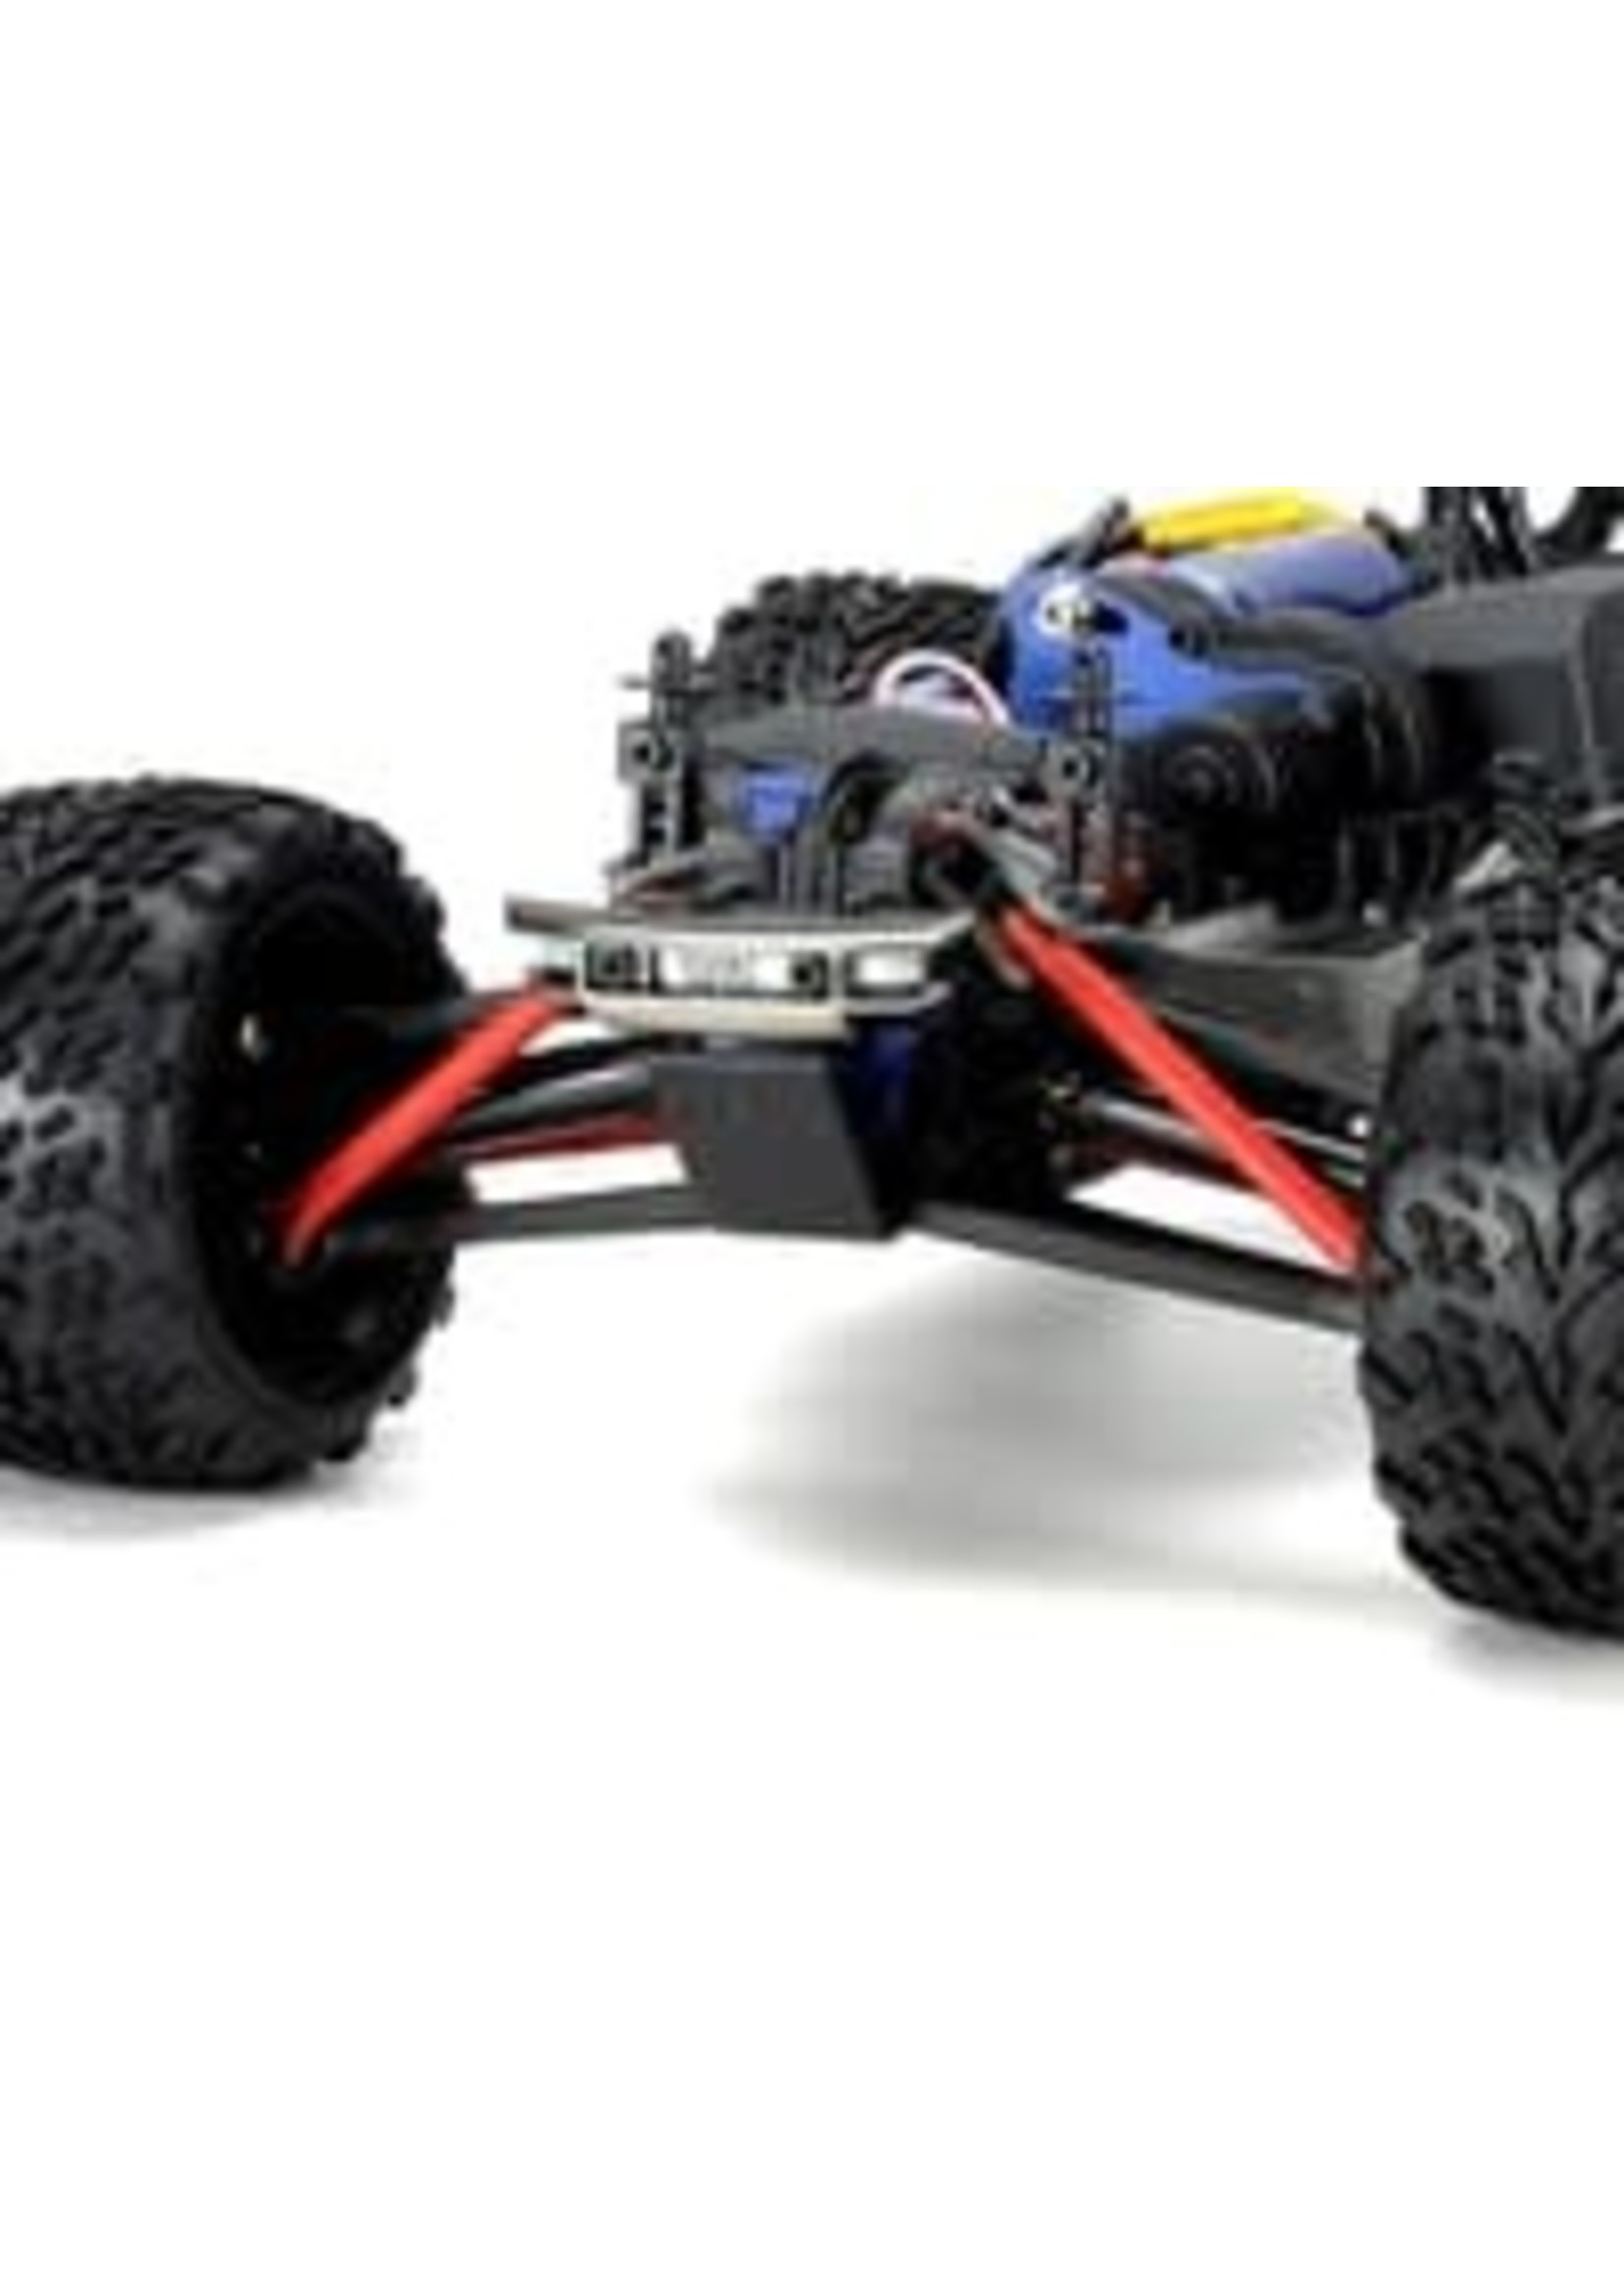 Traxxas 71076-3-BLUEX E-Revo VXL: 1/16-Scale 4WD Racing Monster Truck with TQi Traxxas Link  Enabled 2.4GHz Radio System & Traxxas Stability Management (TSM)